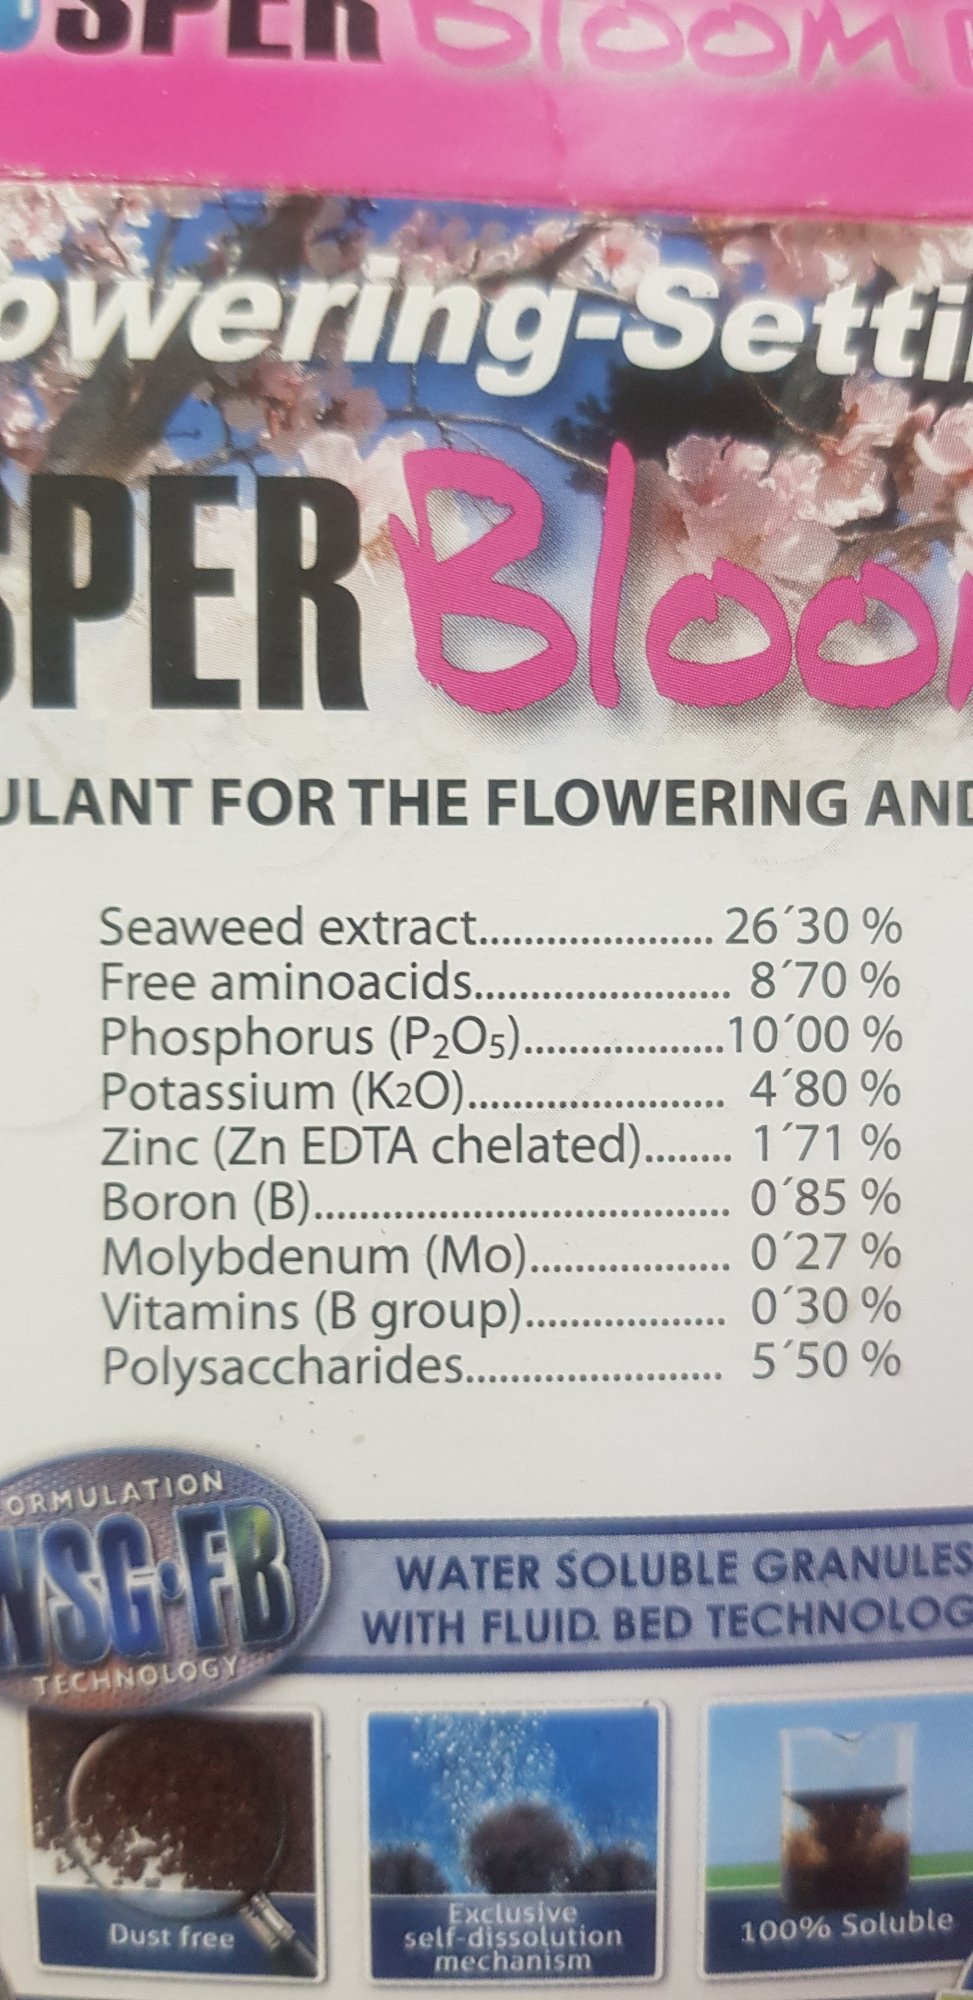 Is this a good fertilizer for flowering